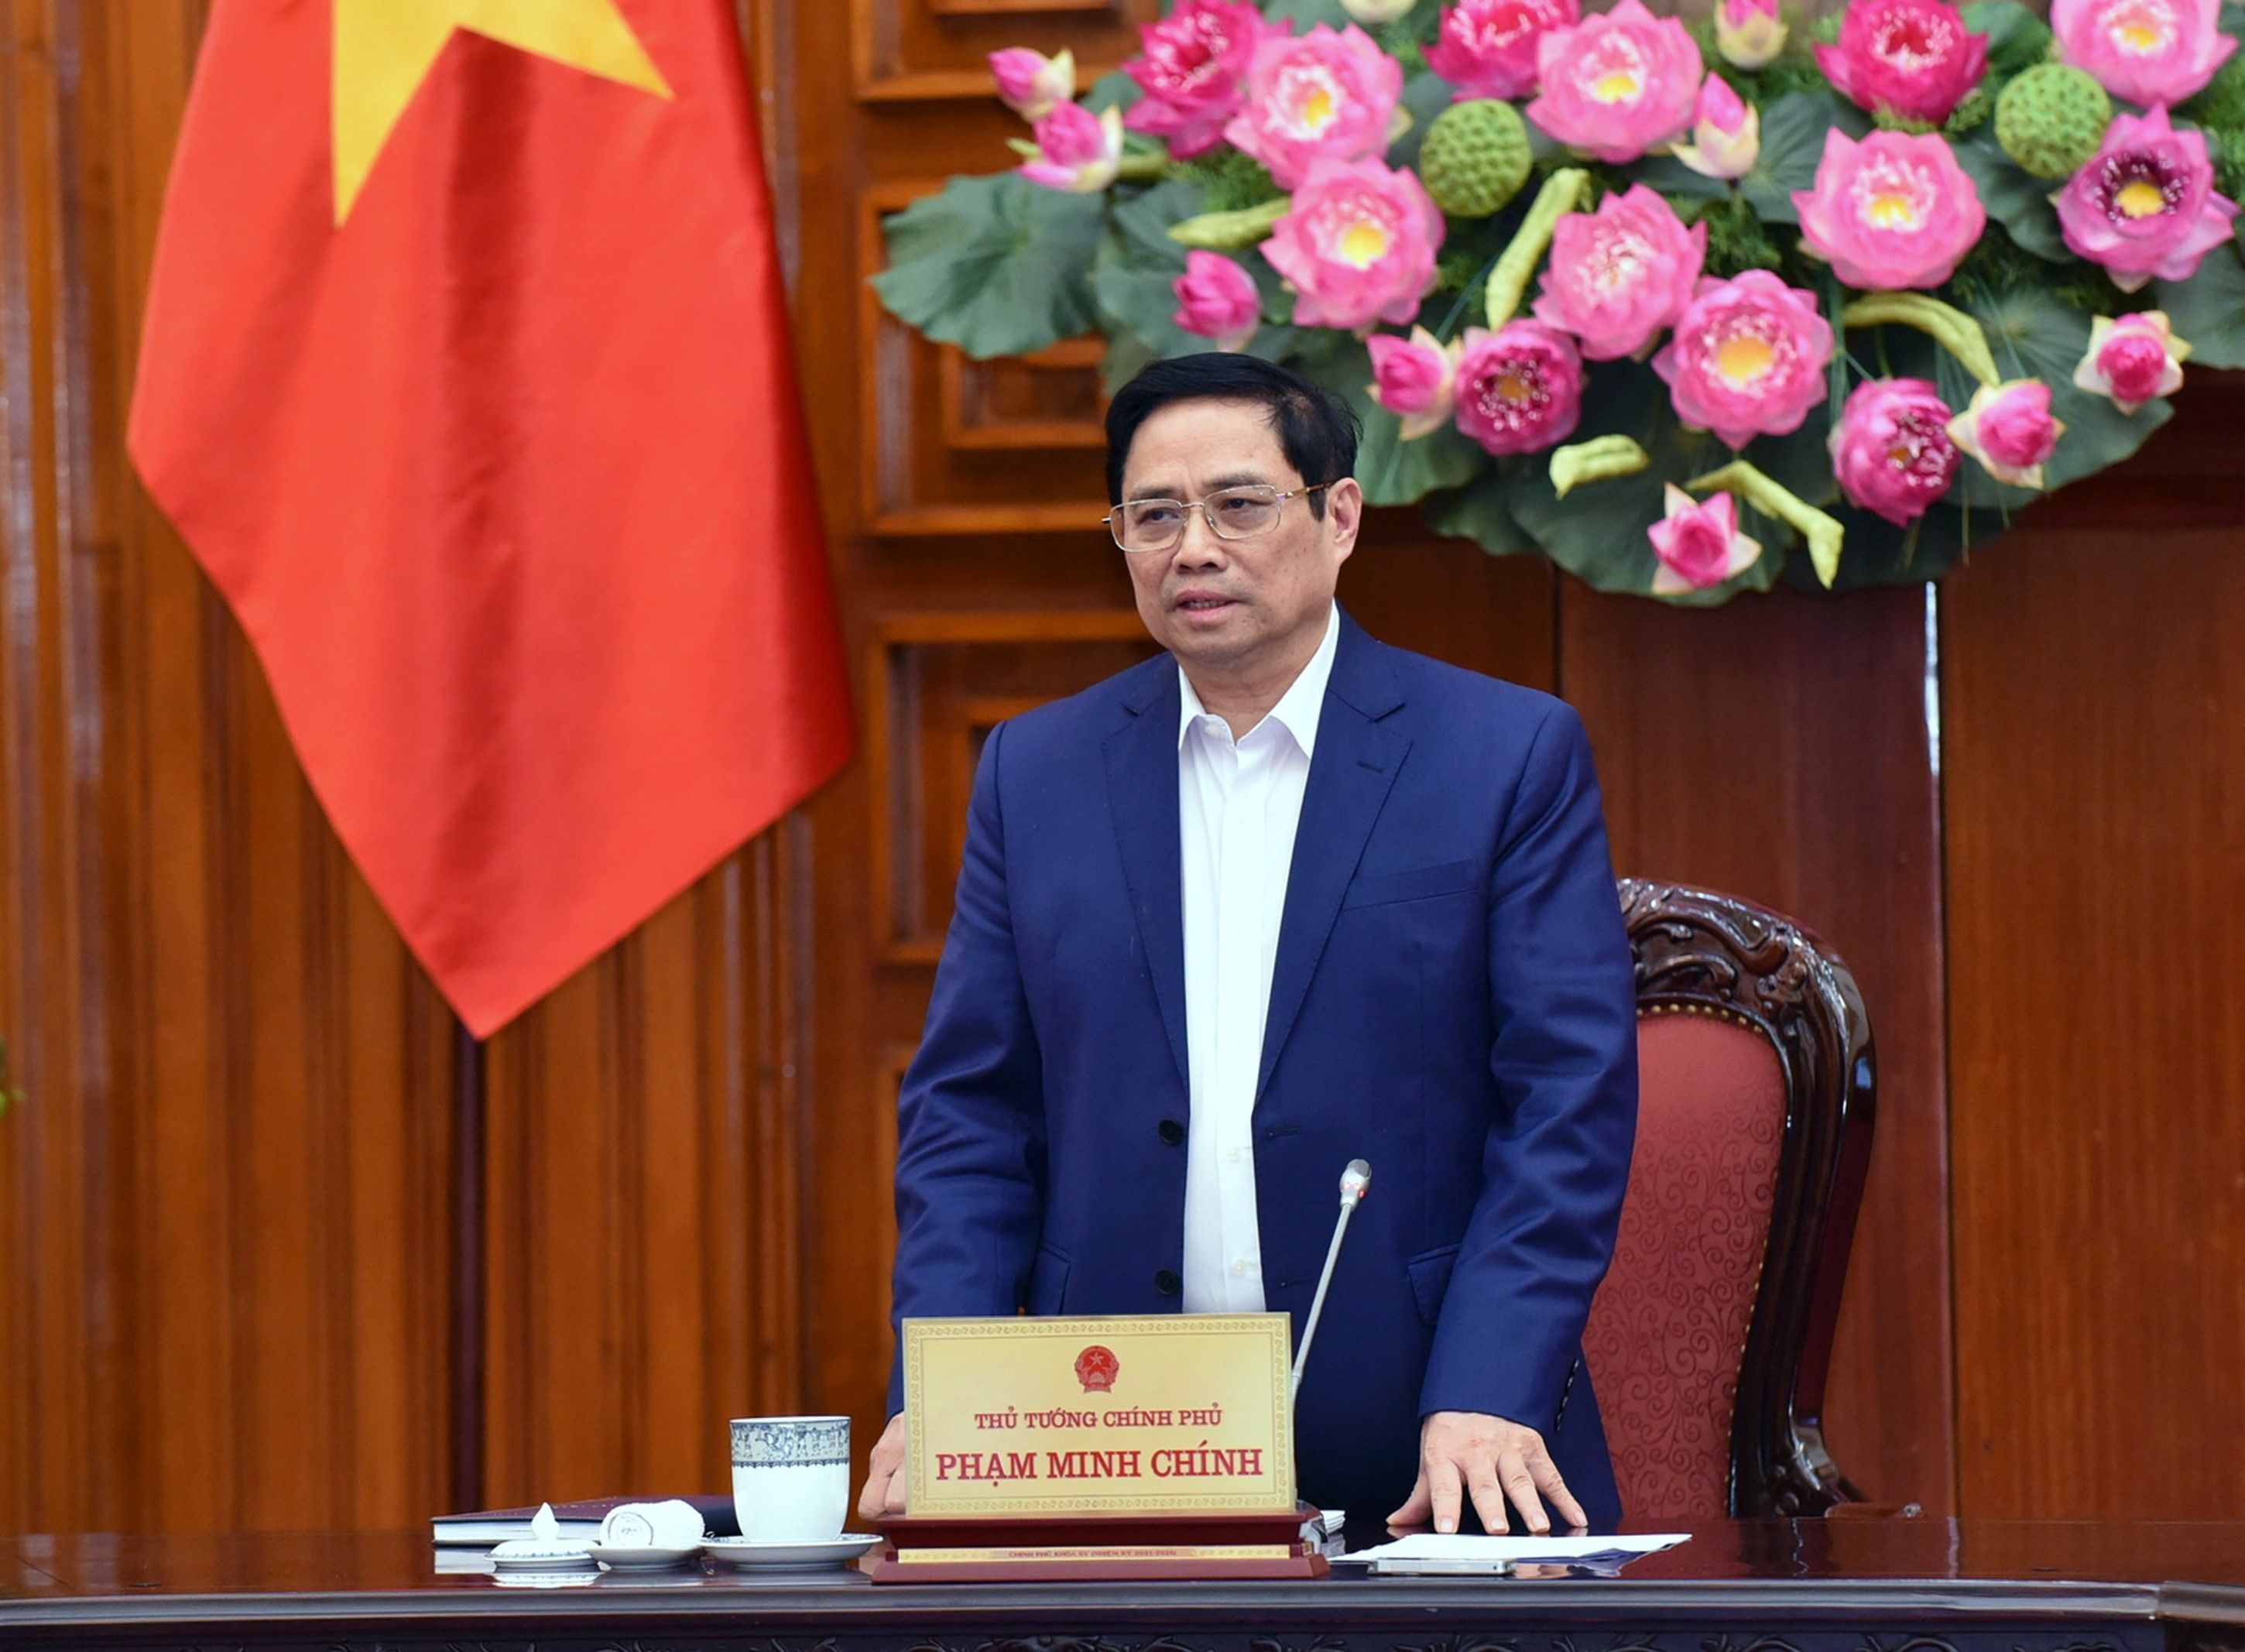  Prime Minister Pham Minh Chinh chairs the meeting with the Da Nang key leaders, December 1, 2021. Photo: VNA